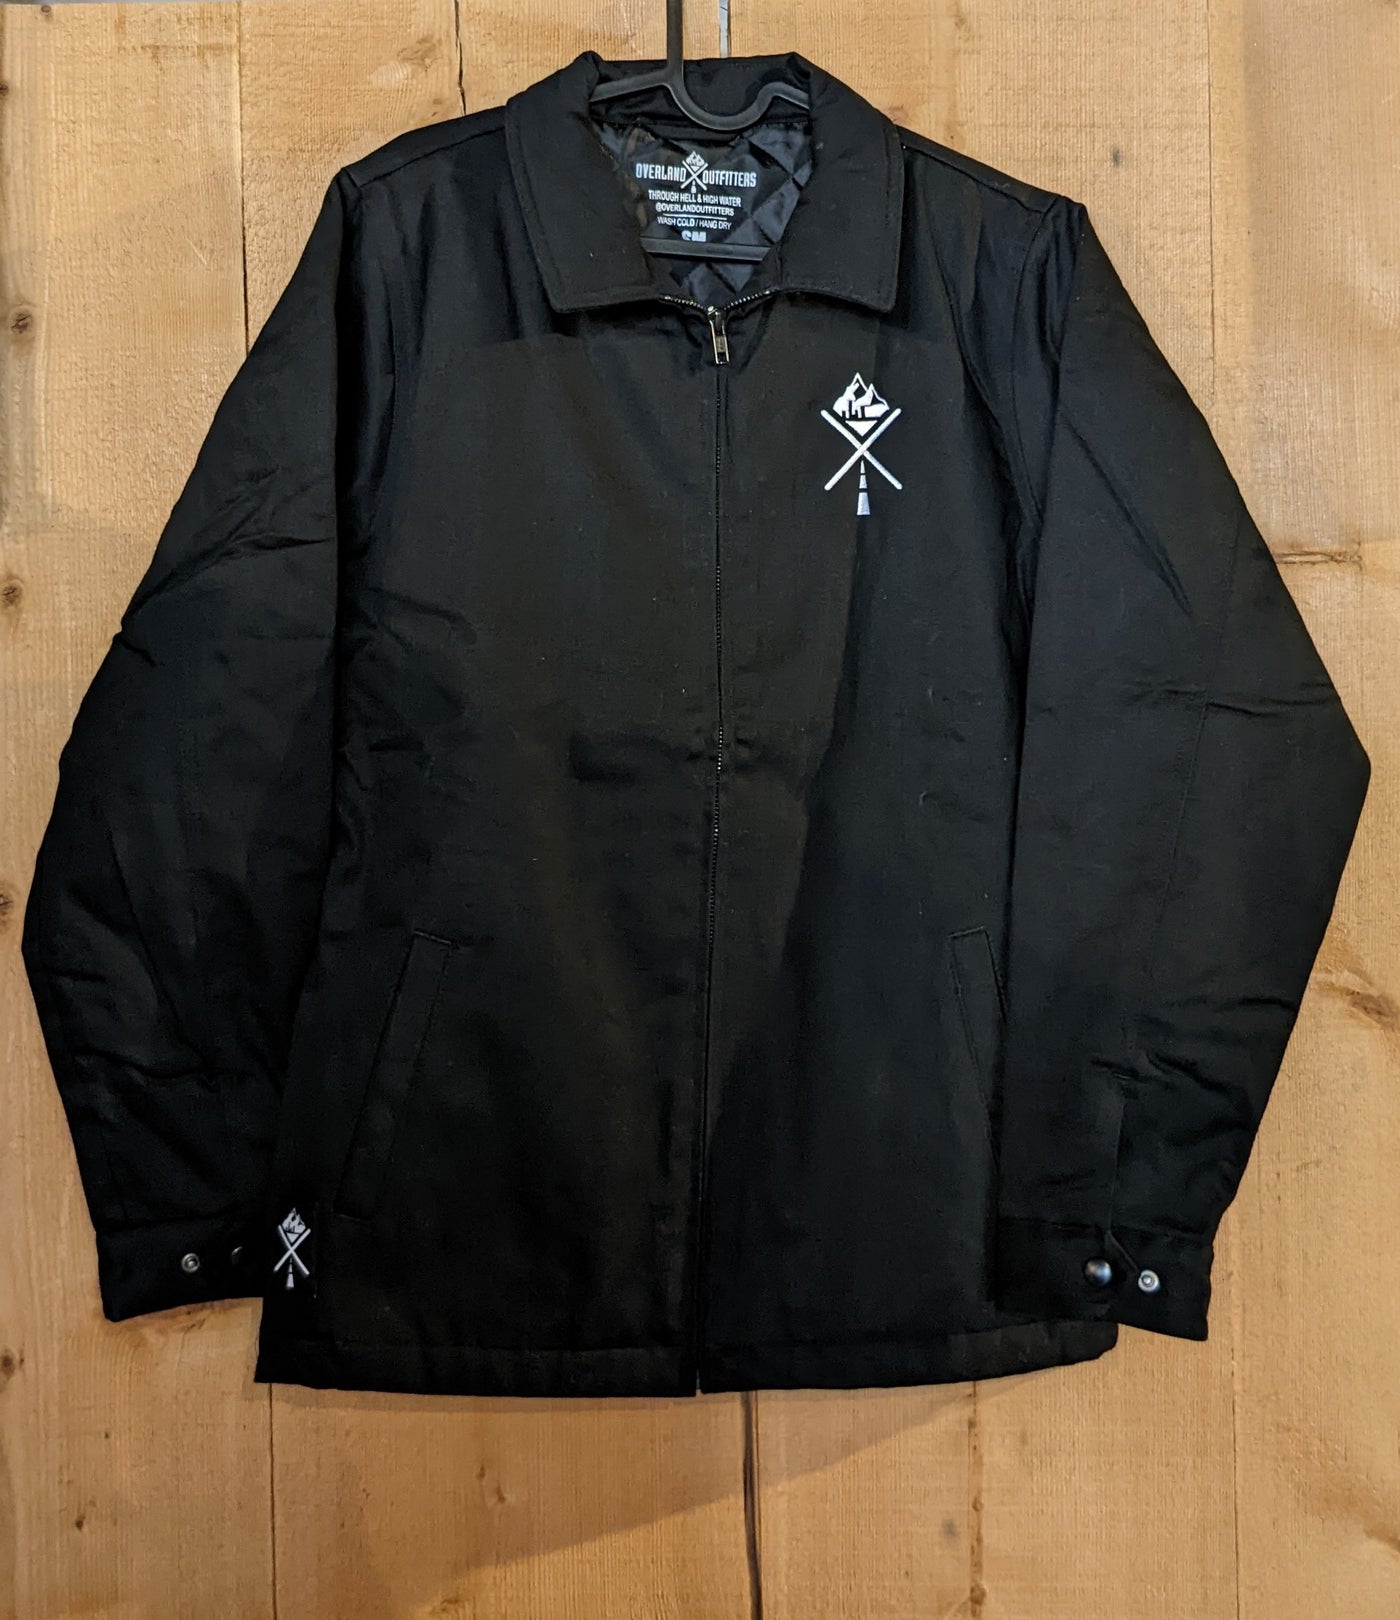 Overland Outfitters Service Jacket